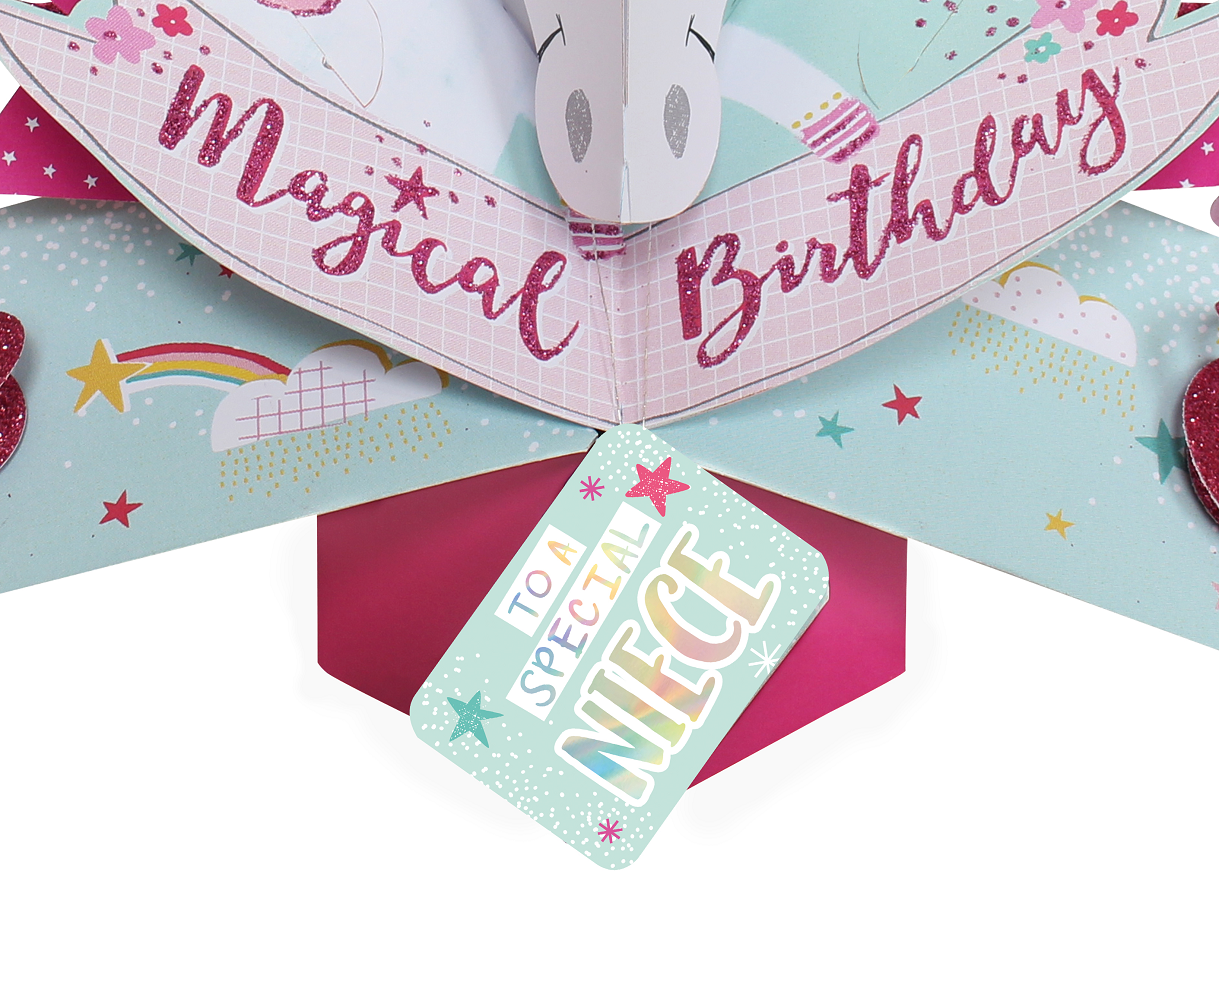 Special Niece Magical Unicorn Birthday Pop-Up Greeting Card